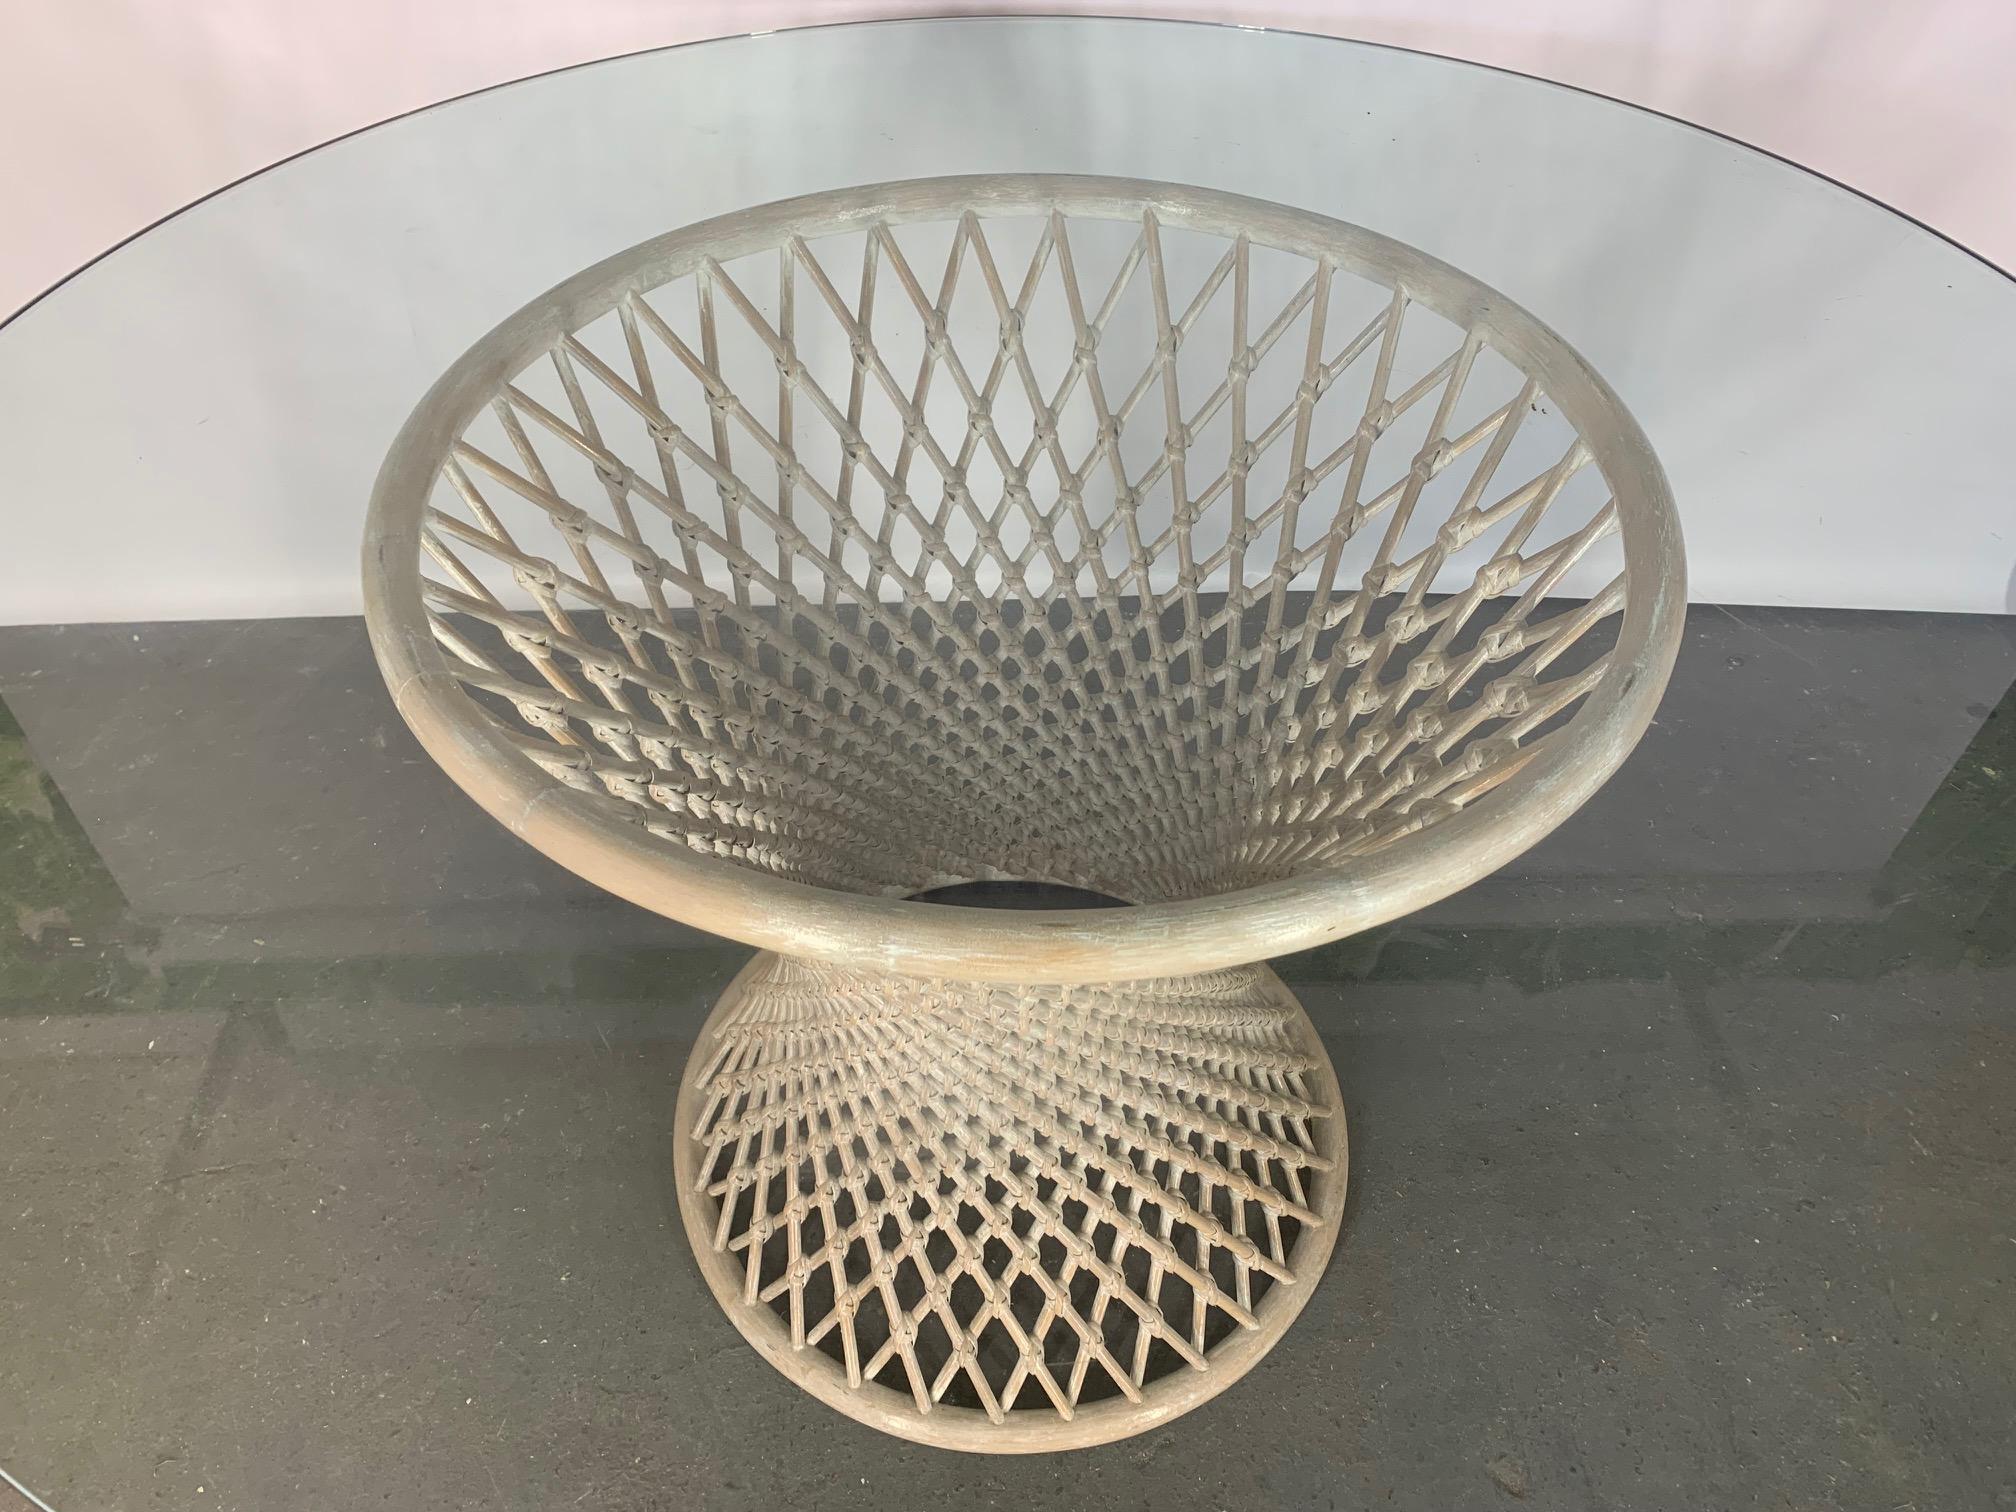 Woven rattan pedestal table features sculptural hourglass shape and round glass top. Very good condition with only minor imperfections consistent with age.